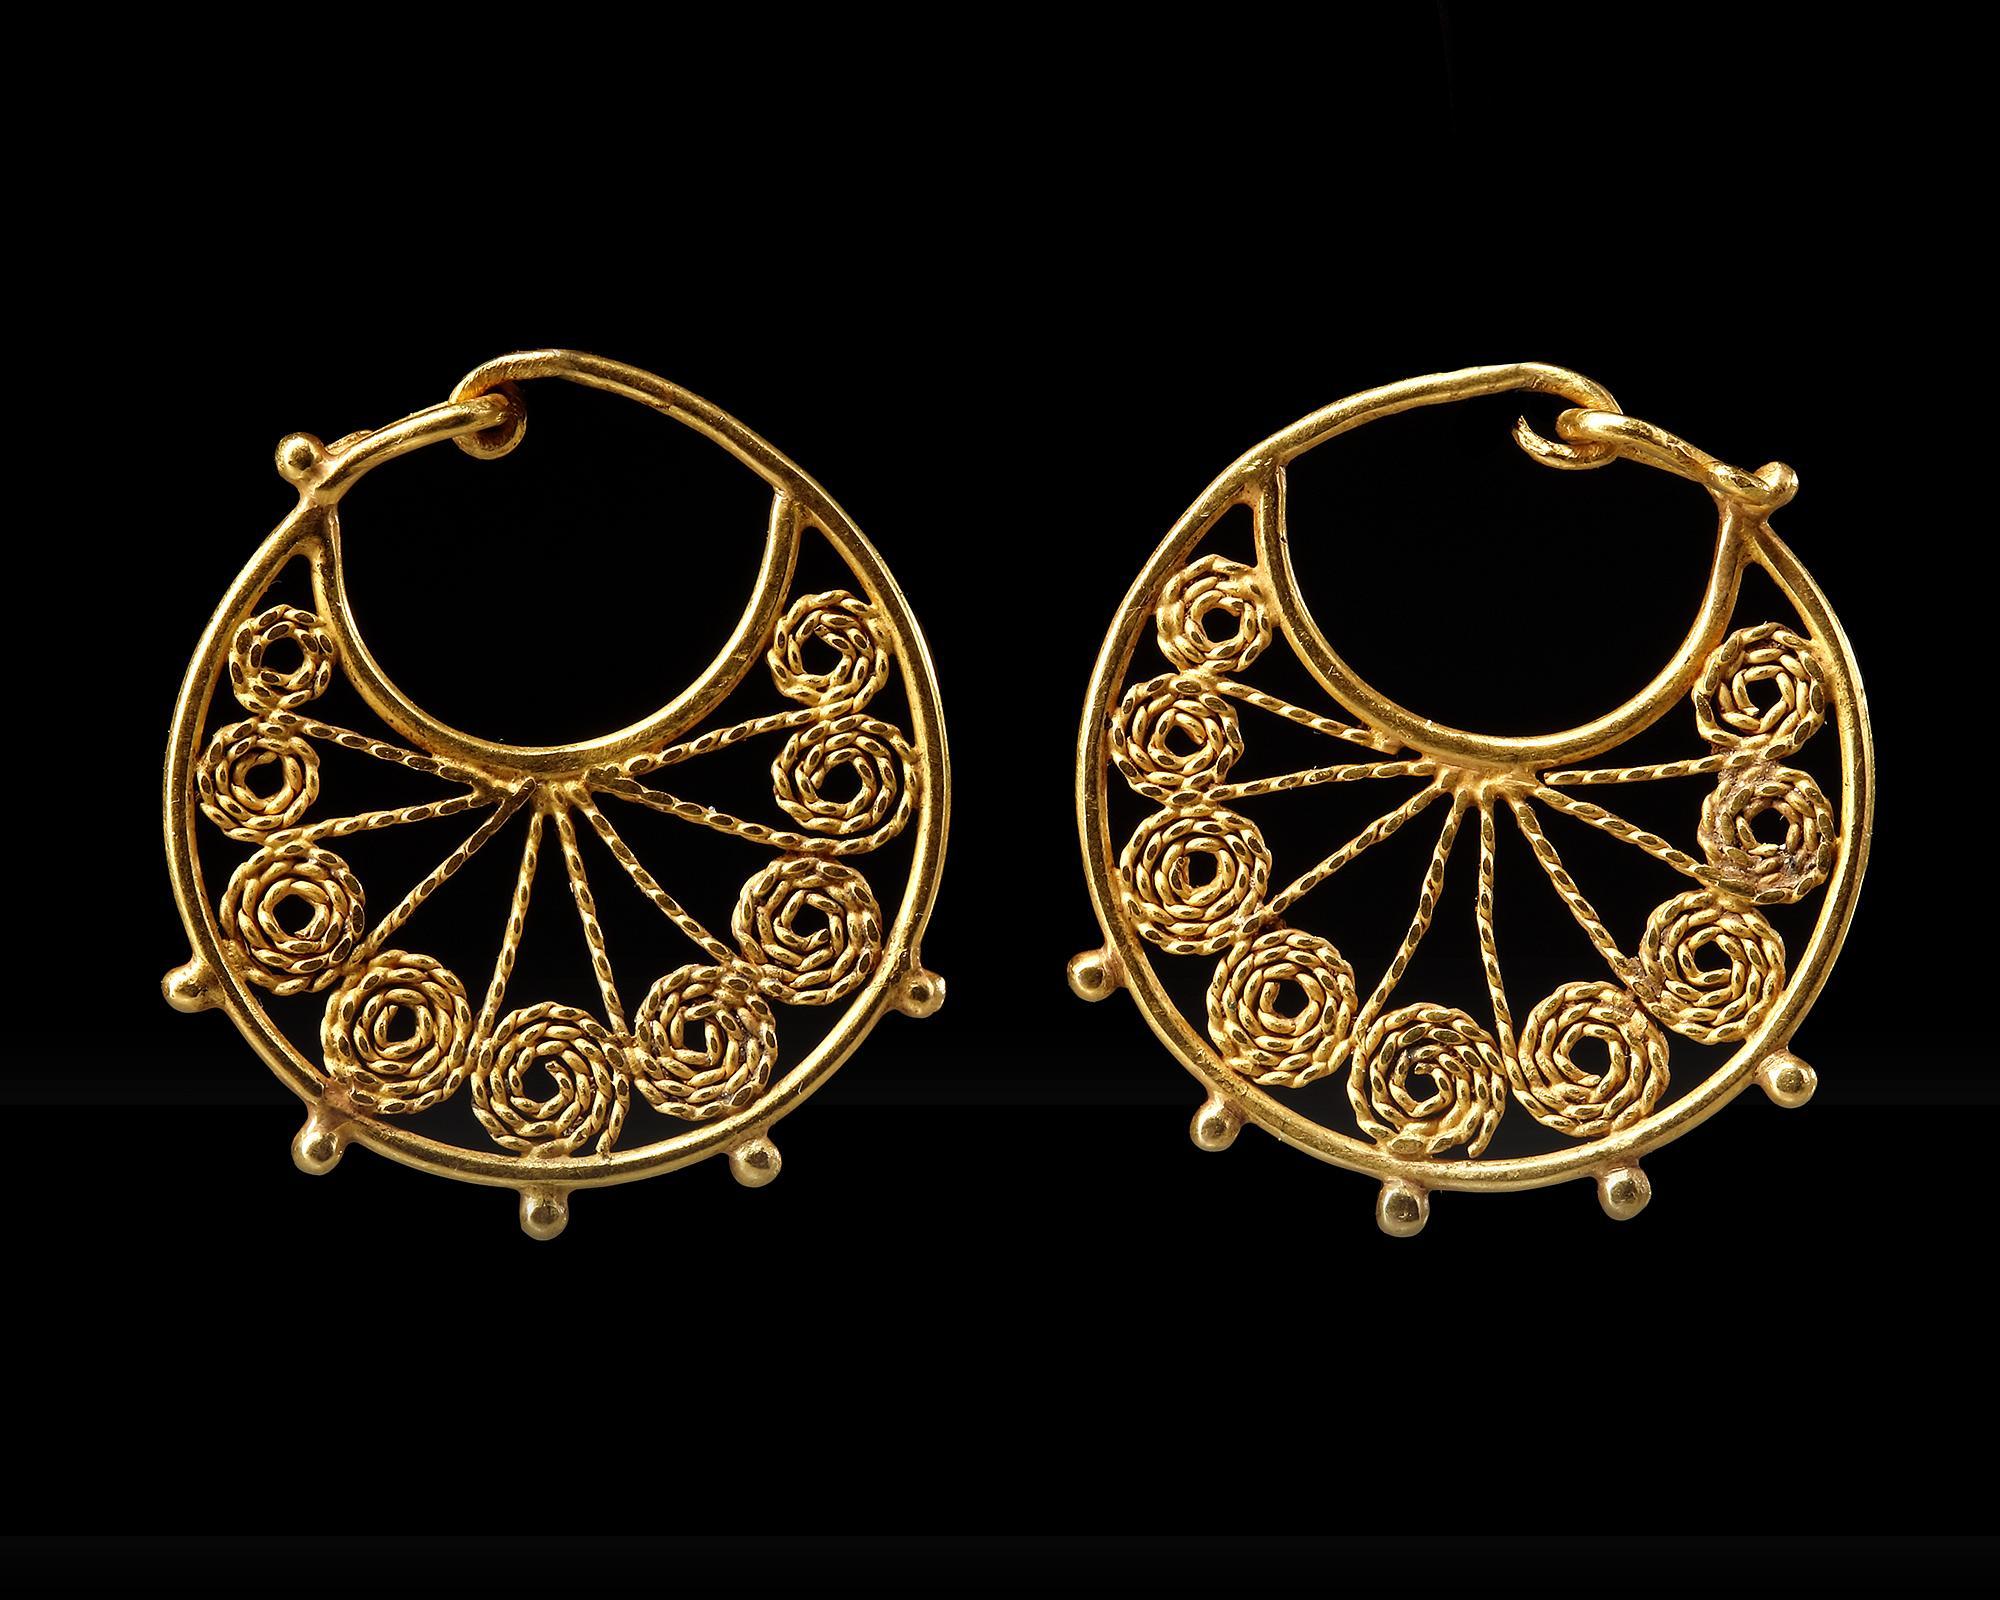 A PAIR OF BYZANTINE GOLD EARRINGS, CIRCA 8TH-10TH CENTURY A.D. - Image 3 of 3